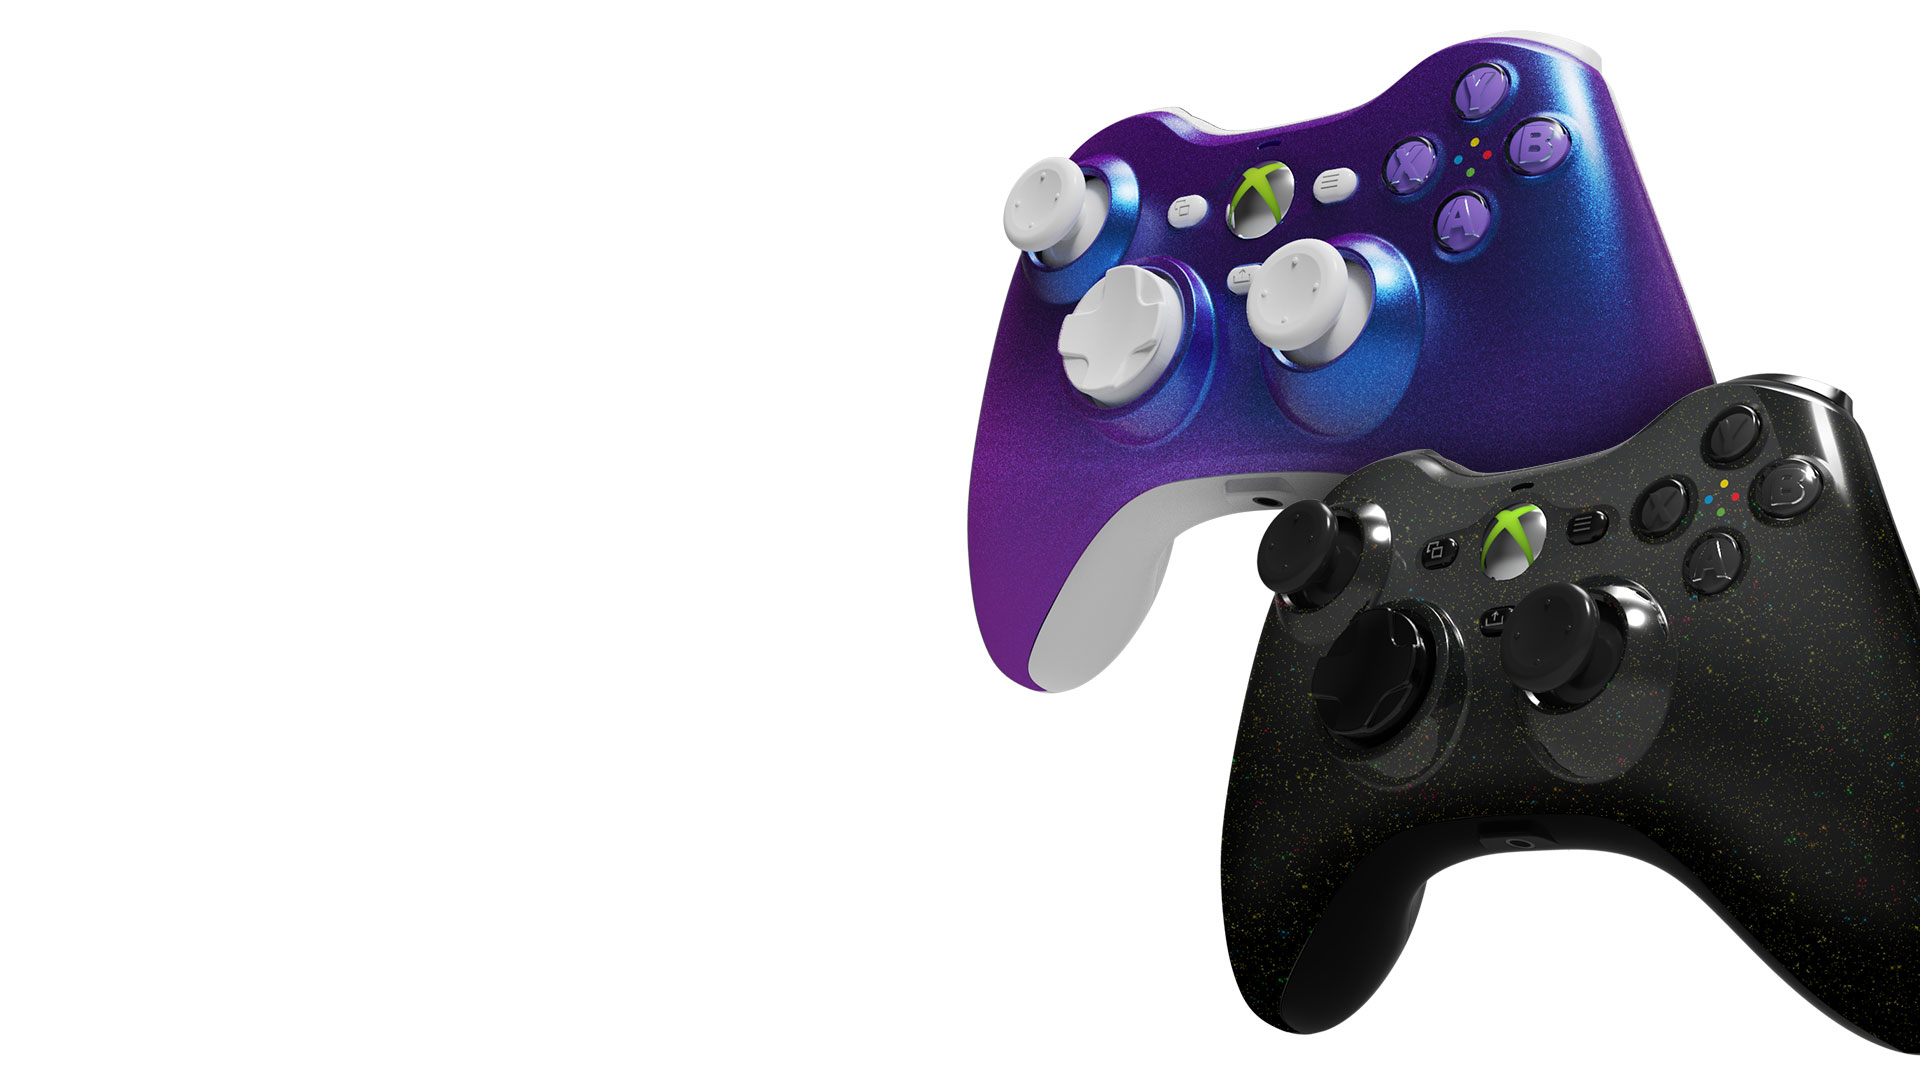 The Hyperkin Xenon Wired Controller for Xbox - Cosmic Night and Twilight Galaxy